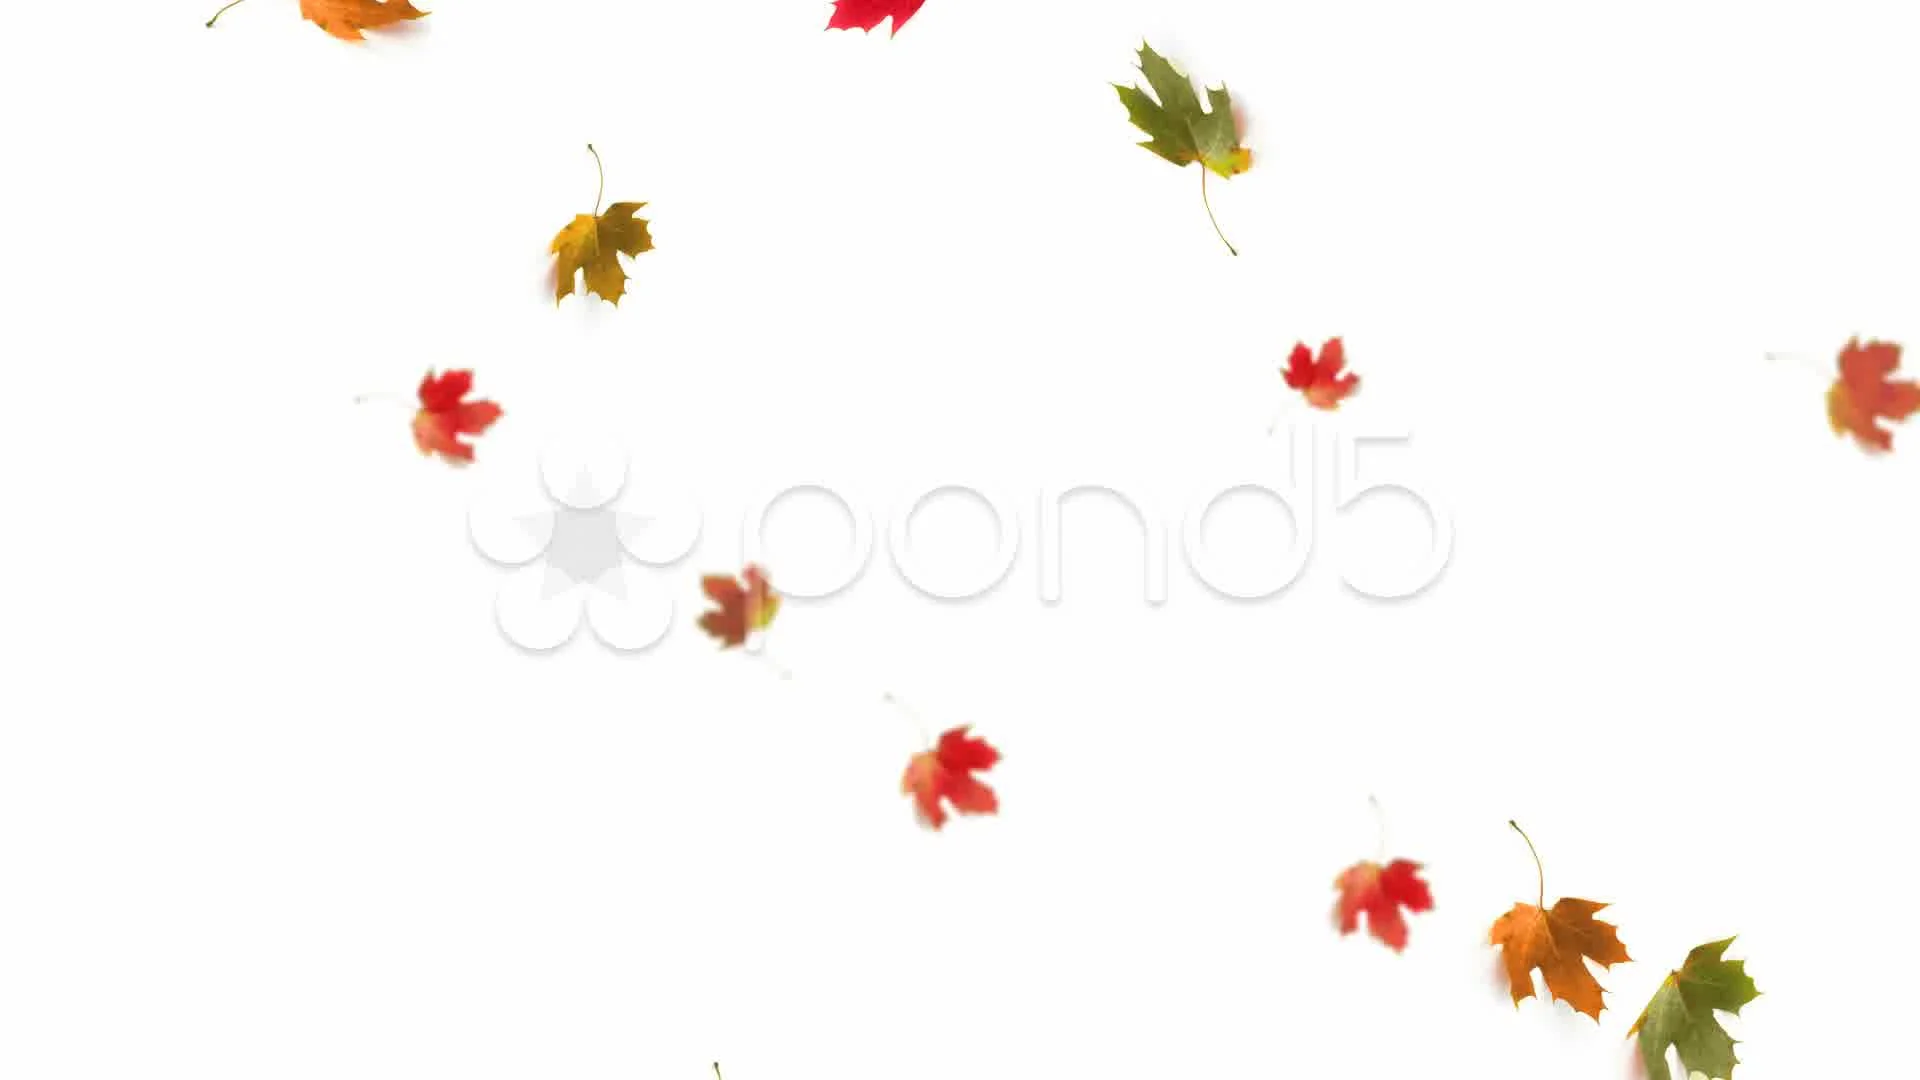 Maple Leaf Fall Animated GIF 600x600 by DP Animation Maker